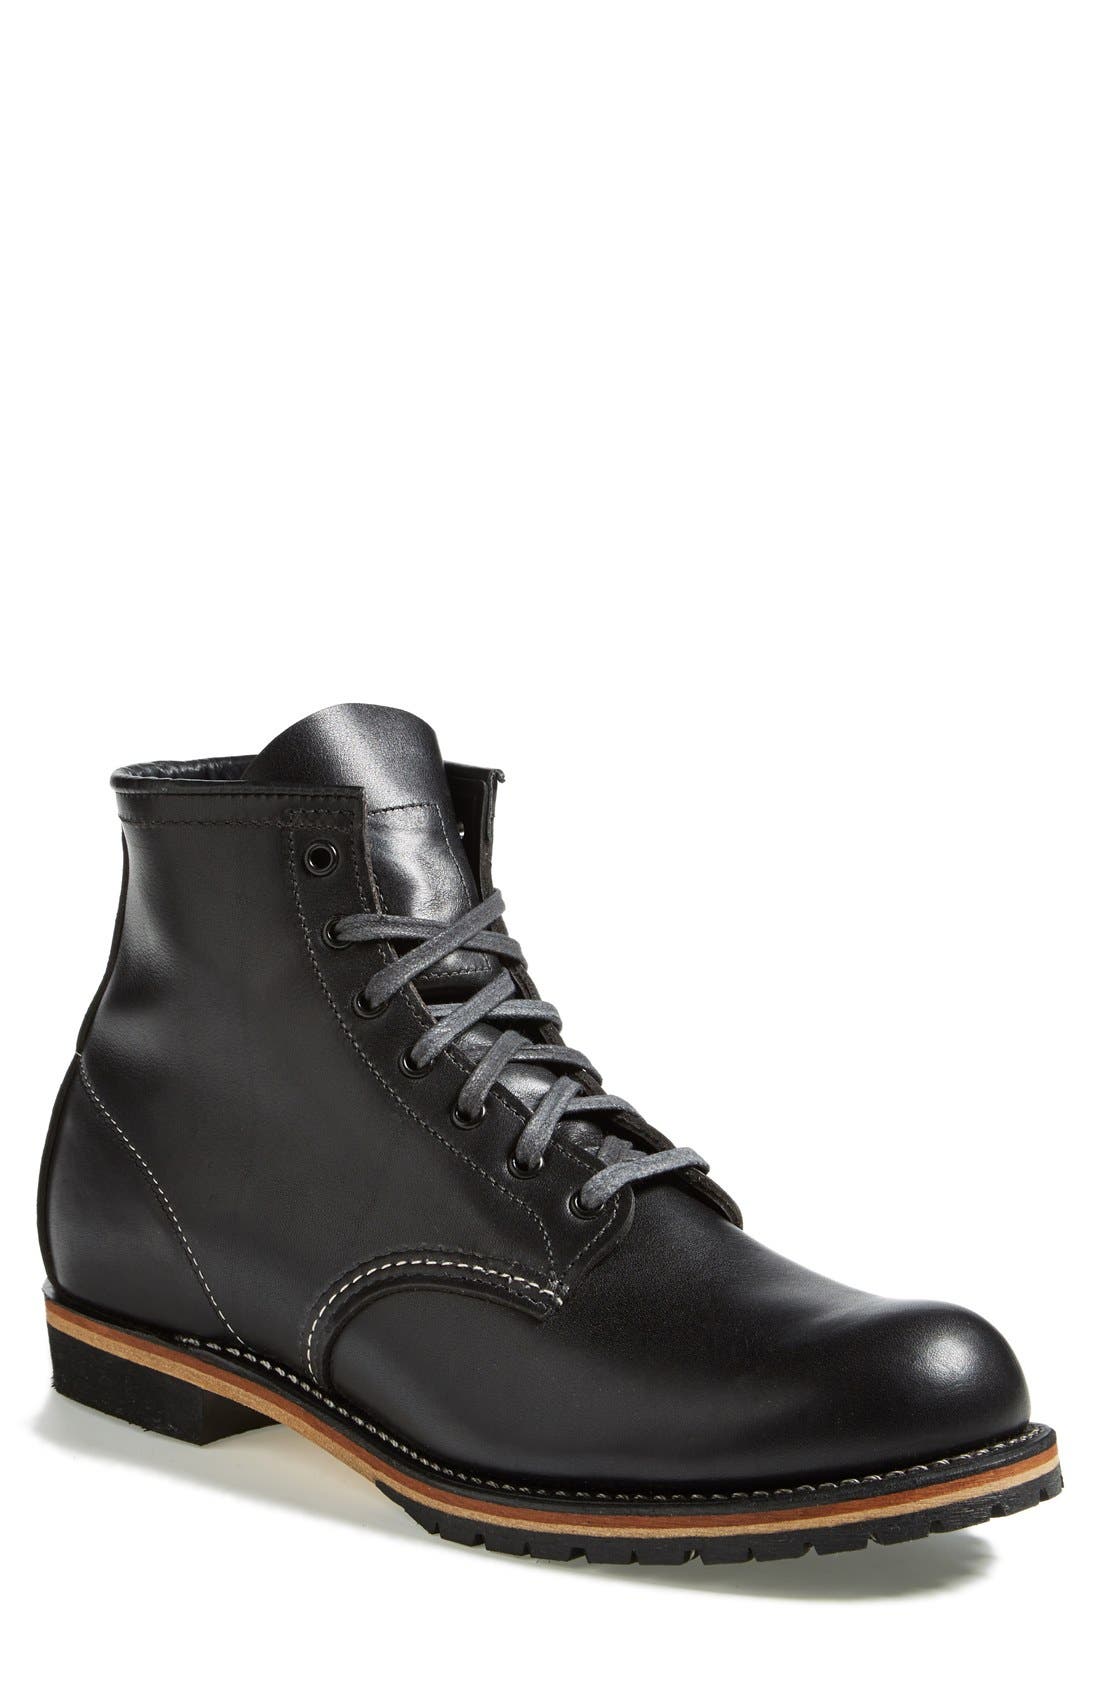 RED WING 'BECKMAN' BOOT, BLACK FEATHERSTONE- 9014 | ModeSens